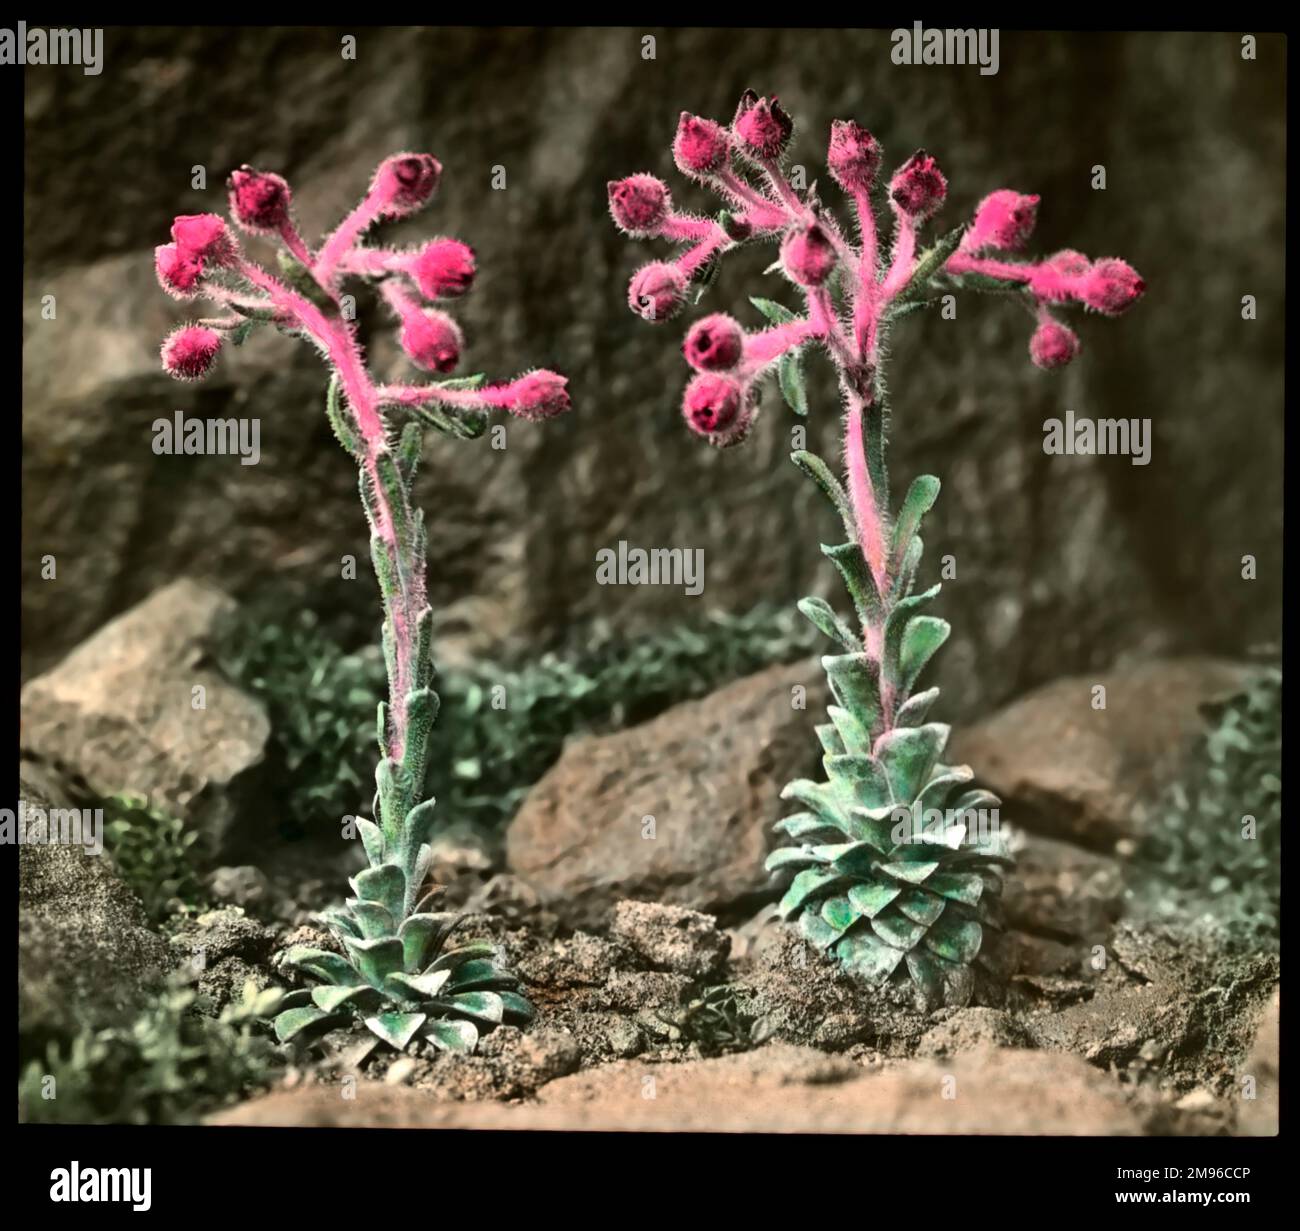 Saxifraga Stribrnyi, a flowering plant of the Saxifragaceae family (commonly known as saxifrages or stone breakers because of their ability to grow in the cracks between rocks).  Seen here growing in a rocky setting, with bright red-purple buds. Stock Photo